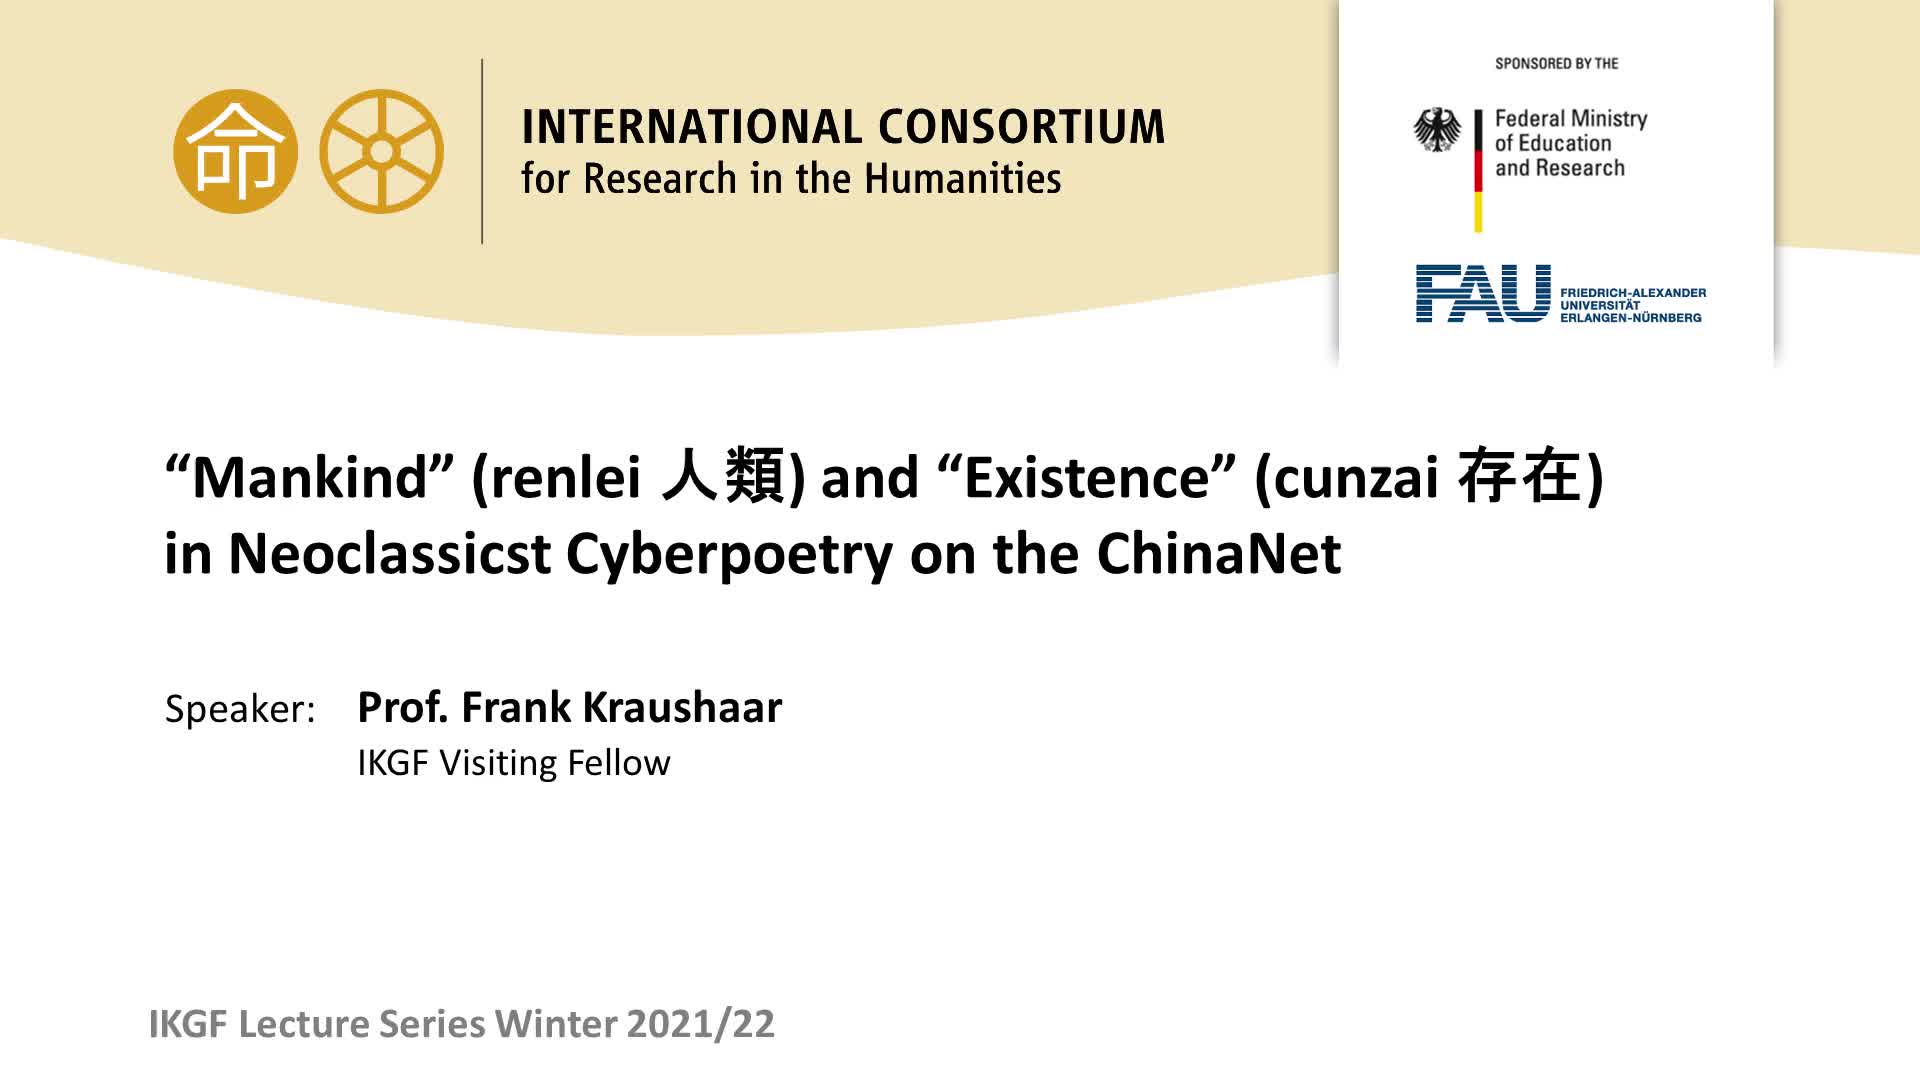 “Mankind” (renlei 人類) and “Existence” (cunzai 存在) in Neoclassicst Cyberpoetry on the ChinaNet preview image